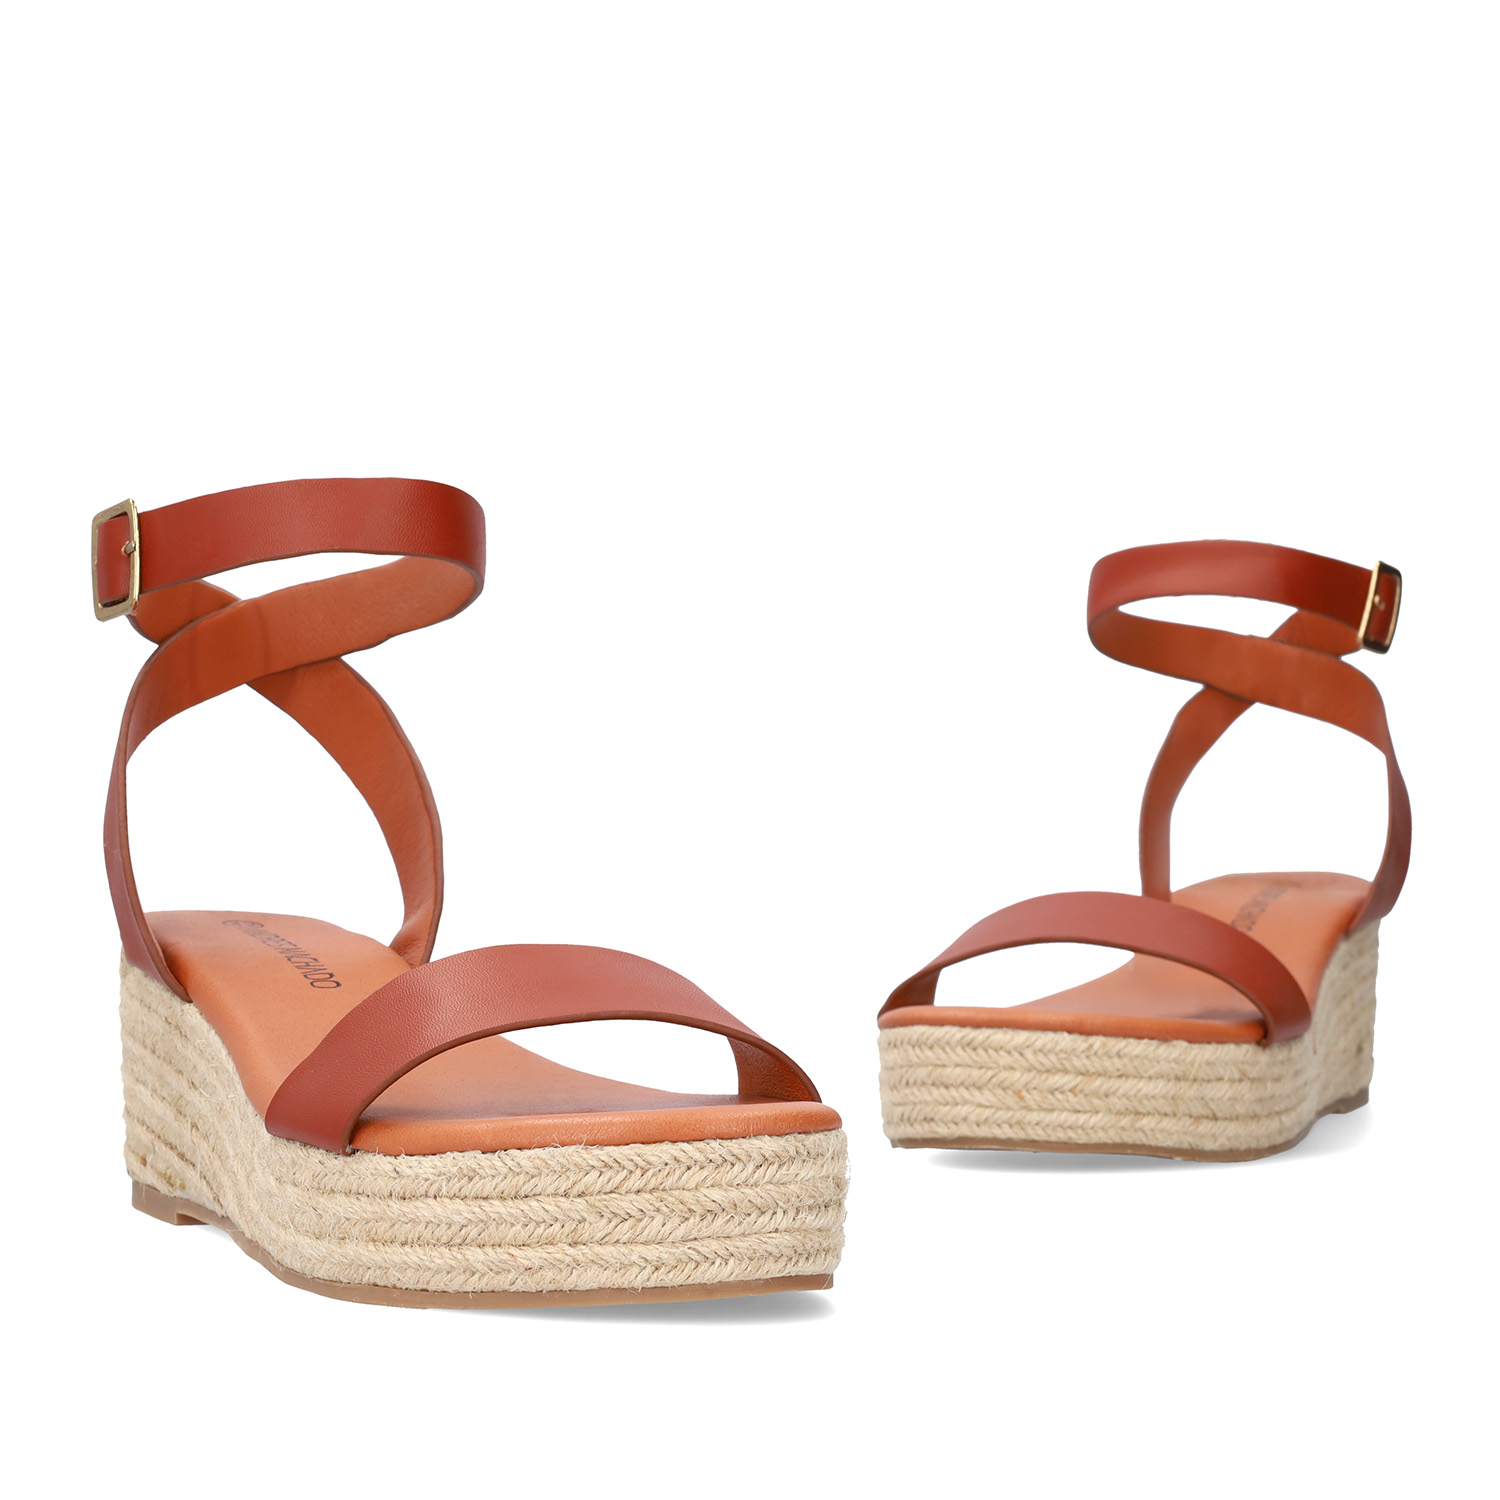 Brown soft sandals with a jute wedge 